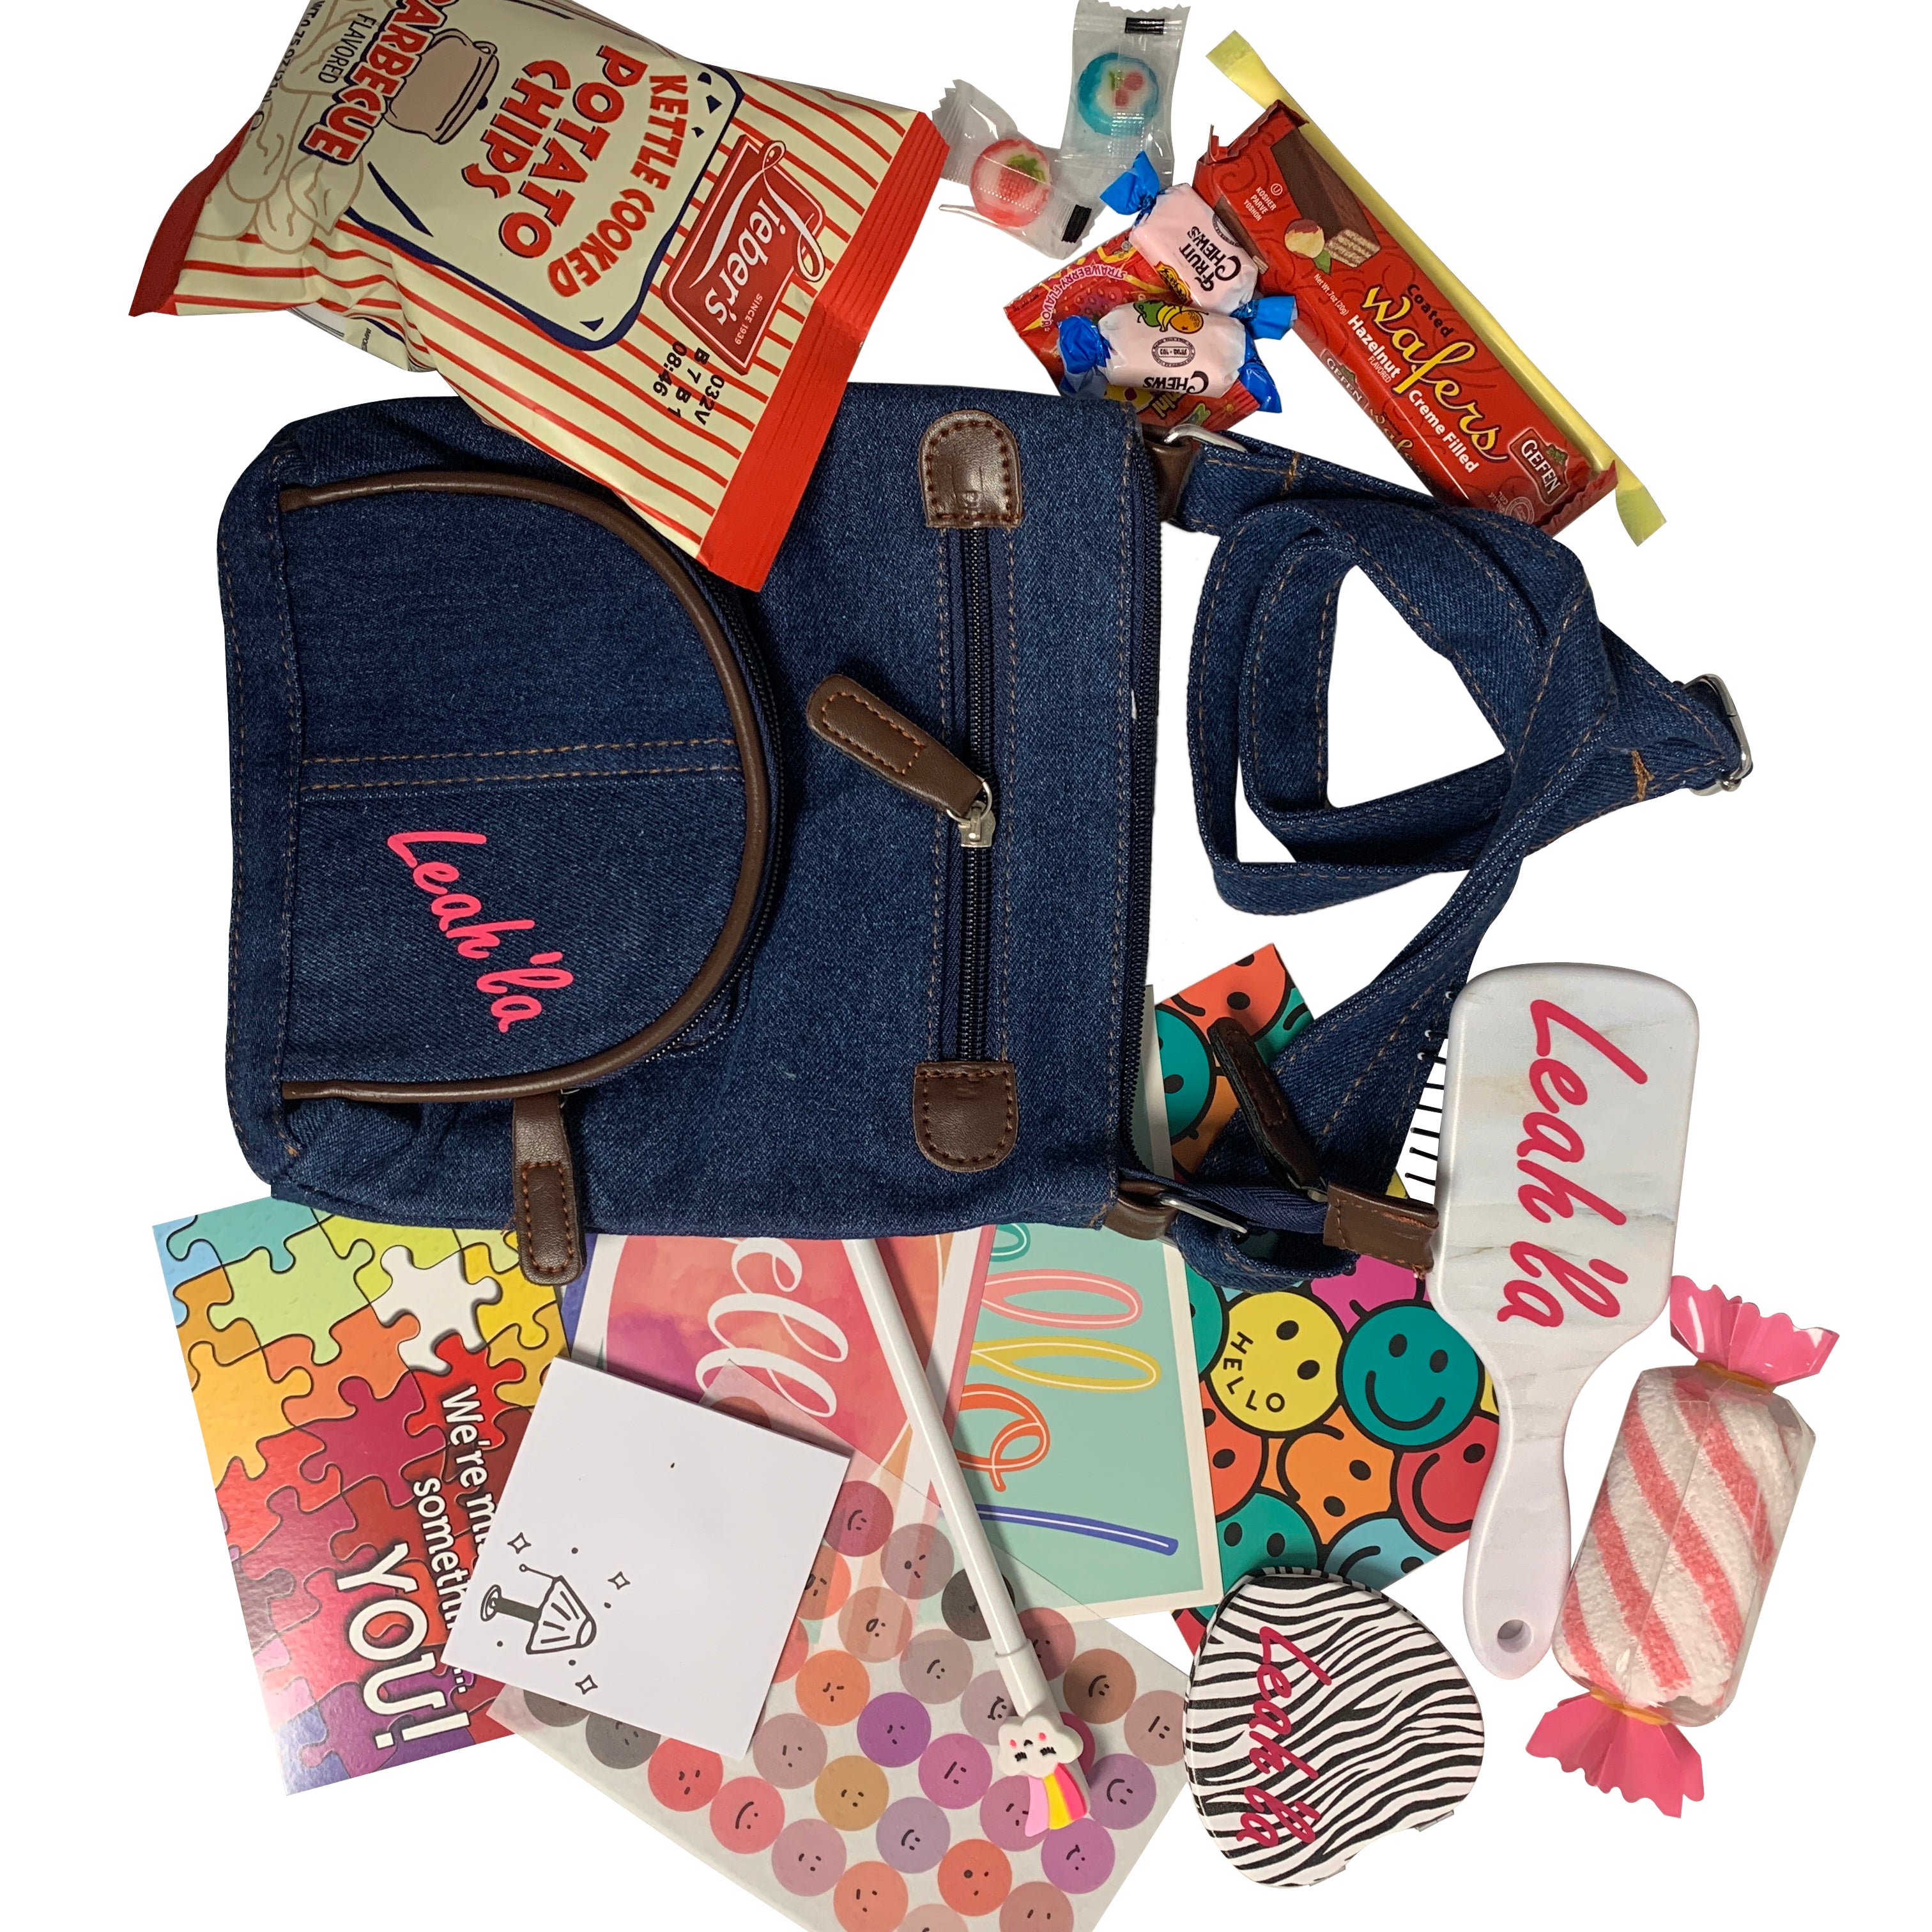 "Bag of Fun" Camp Packages for girls in an adorable useful denim side bag / brush/ towel with lots of more goodies